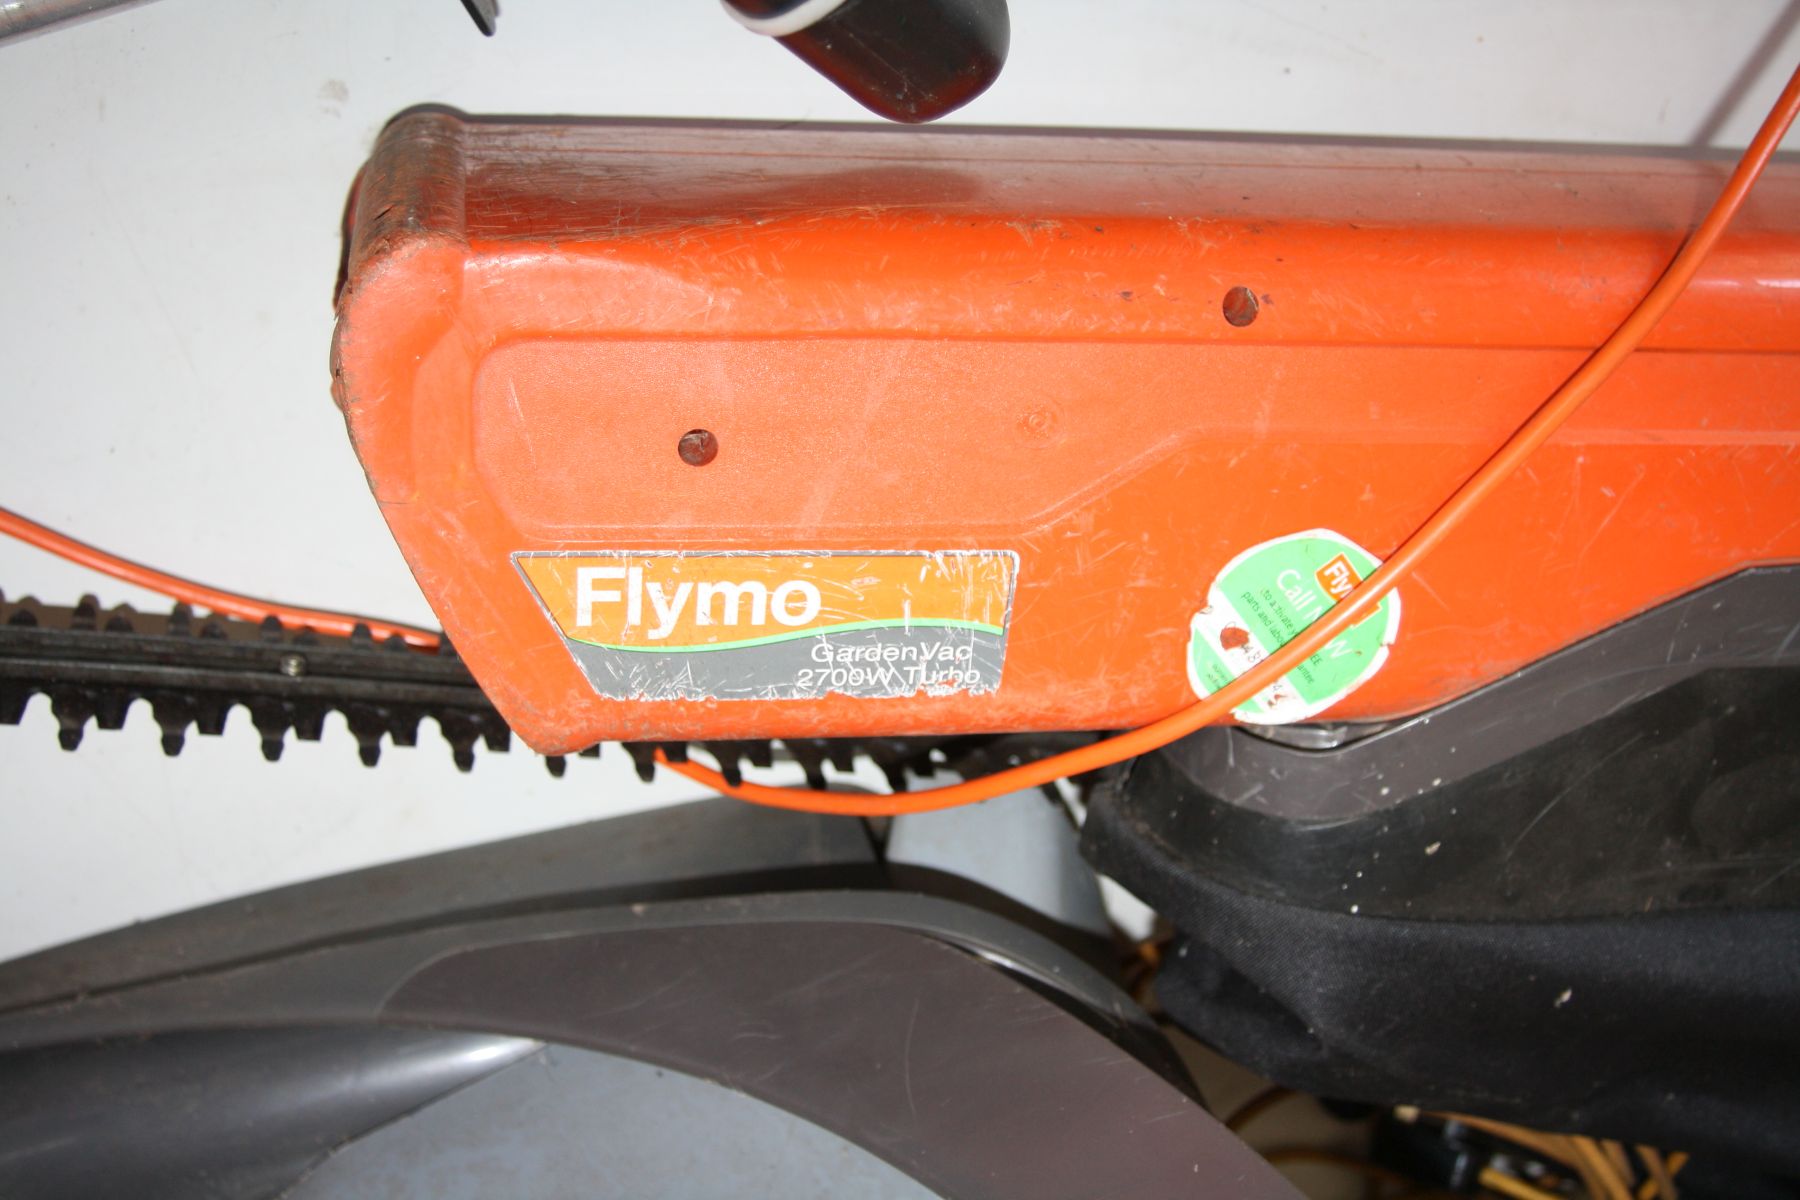 A FLYMO EASYGLIDE 300V LAWN MOWER (untested no cable), a Flymo Garden vac 2700WT turbo garden vac ( - Image 3 of 4